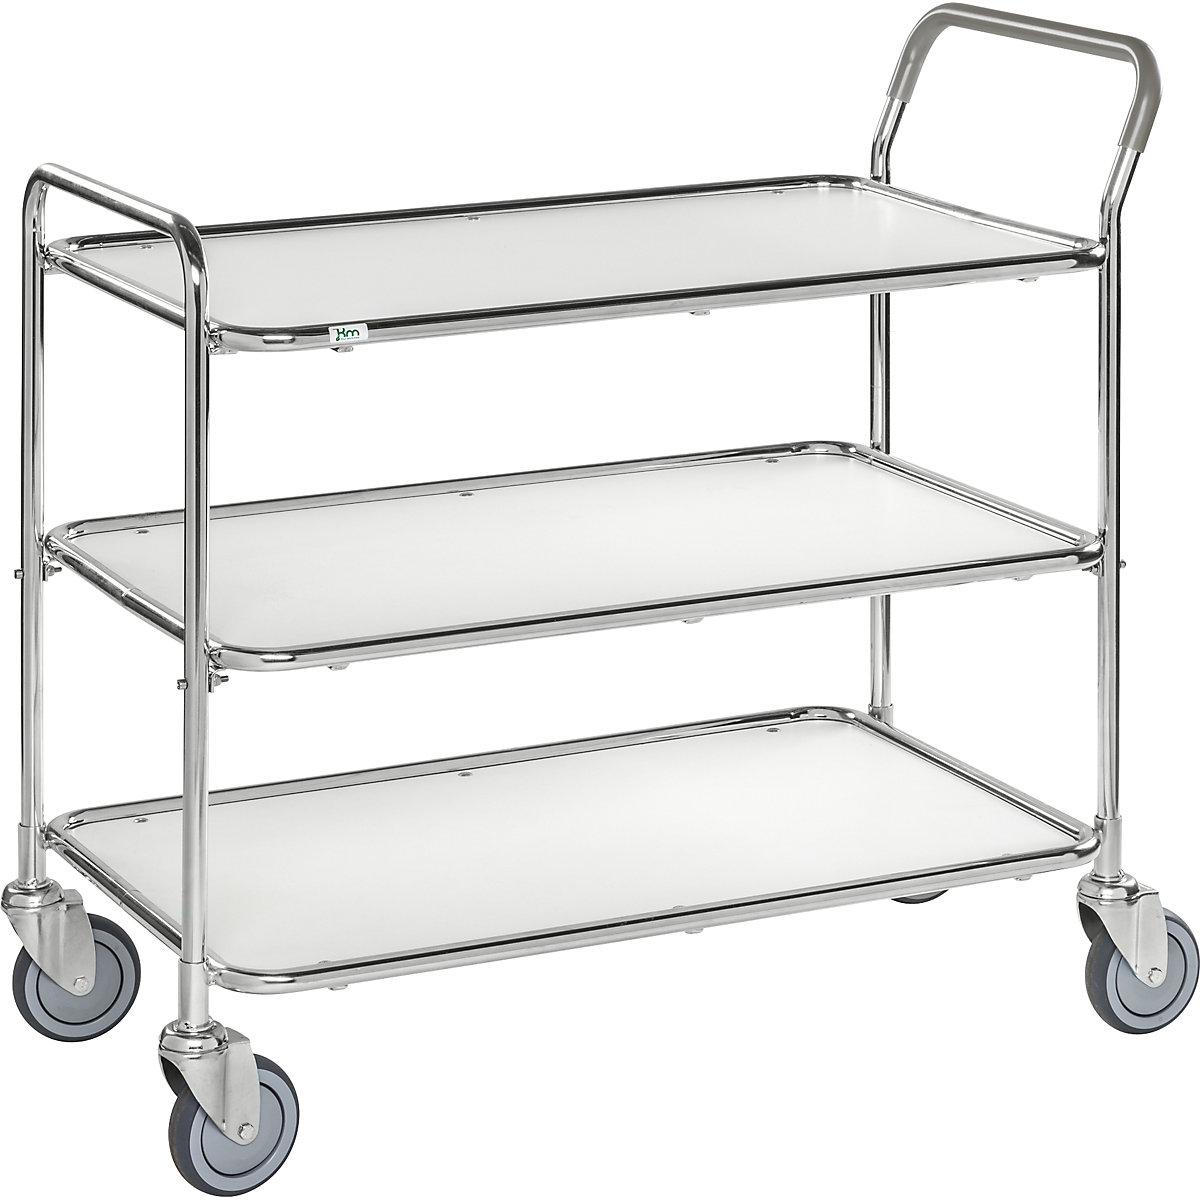 Table trolley – Kongamek, 3 shelves, LxWxH 1020 x 555 x 965 mm, zinc plated / white, 2+ items-14